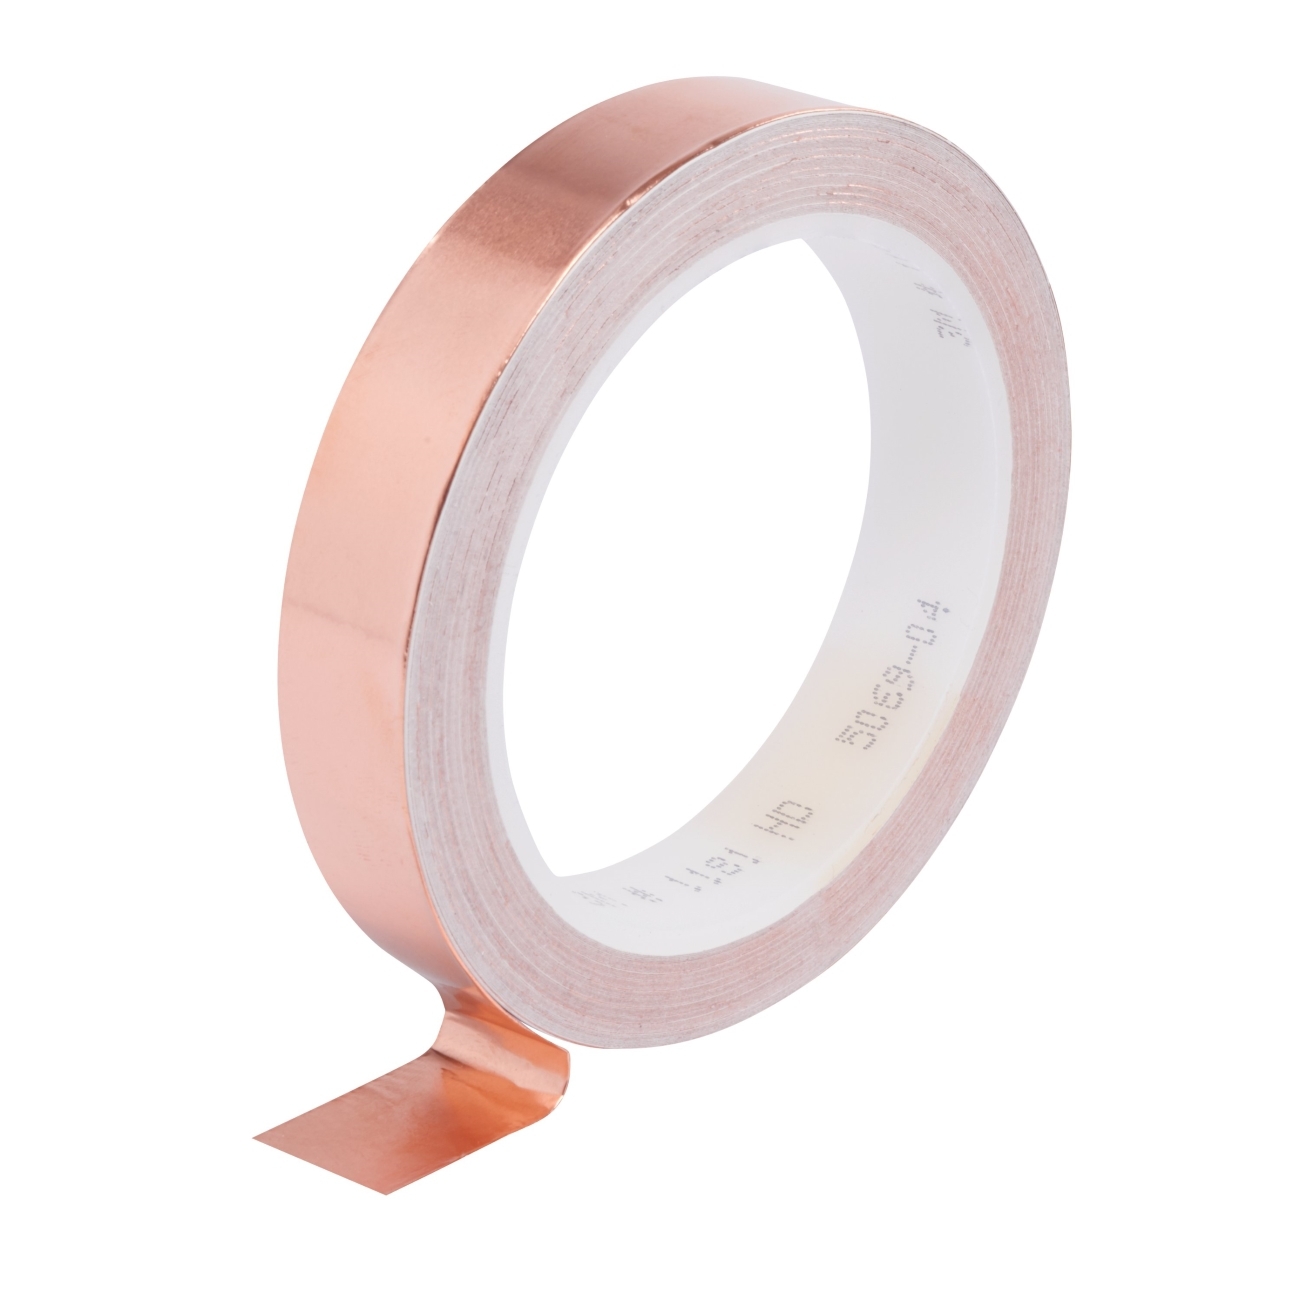 3M ET 1181 Copper foil smooth, with conductive adhesive, copper, 25 mm x 16.5 m x 0.07 mm